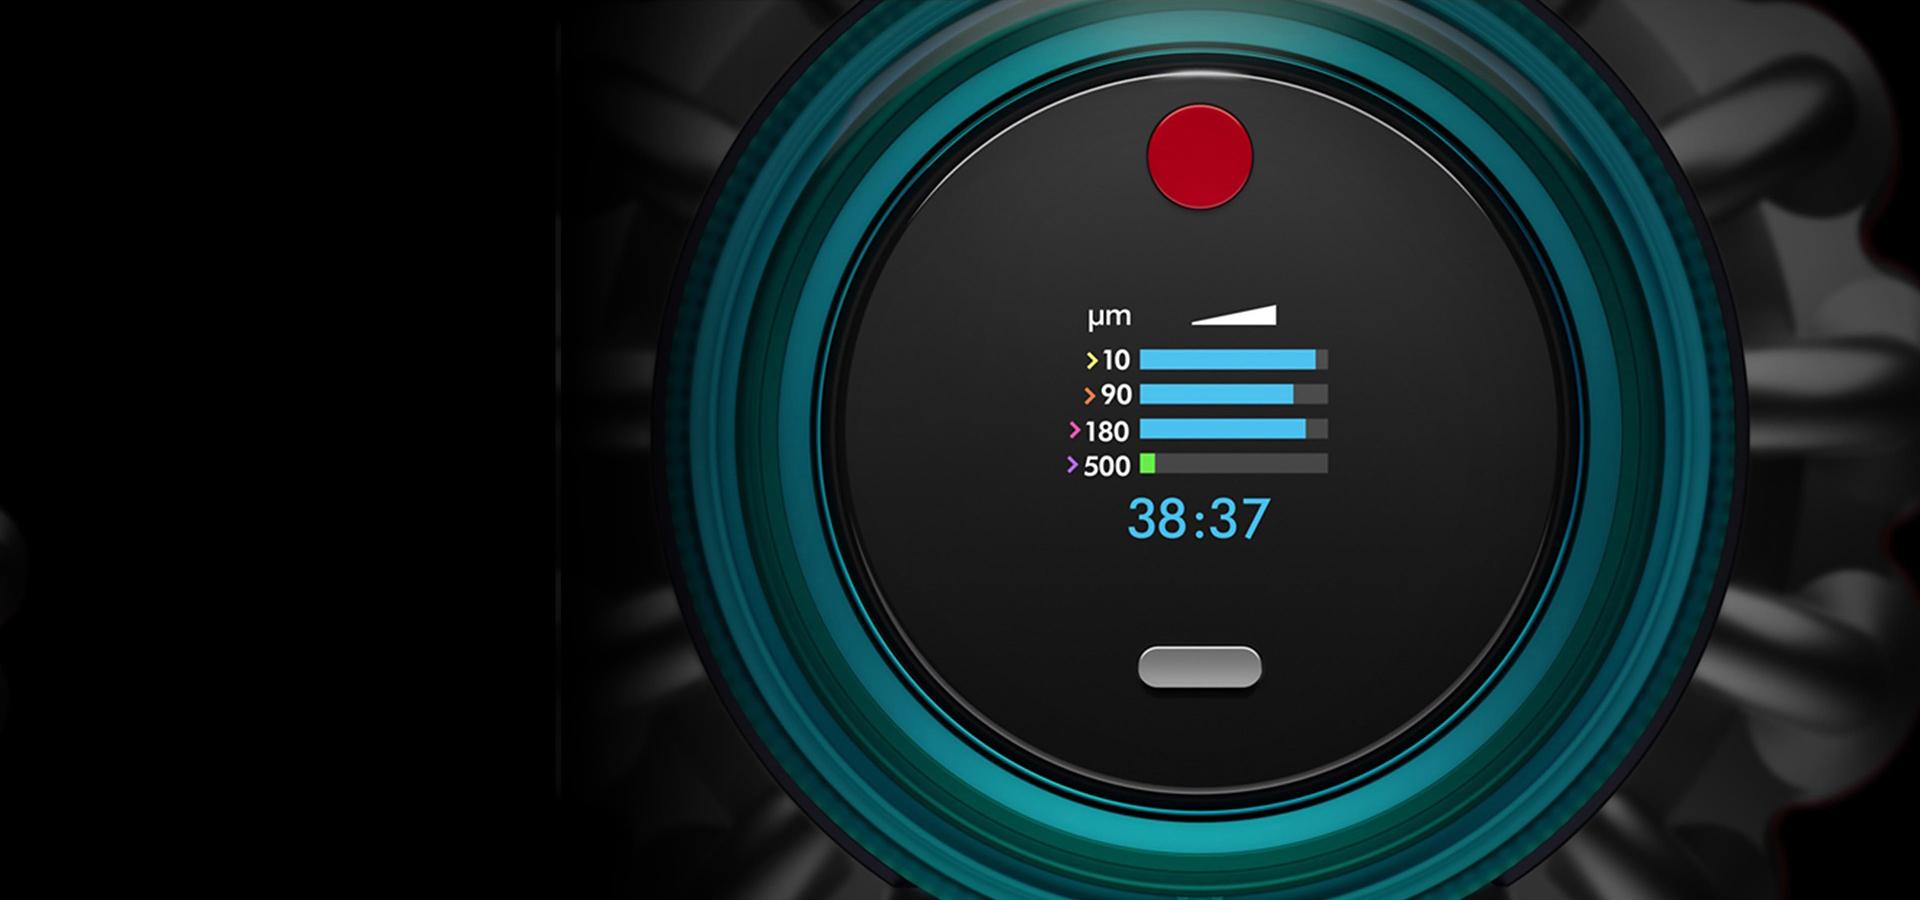 Close up of the user interface showing particle graph and run time.